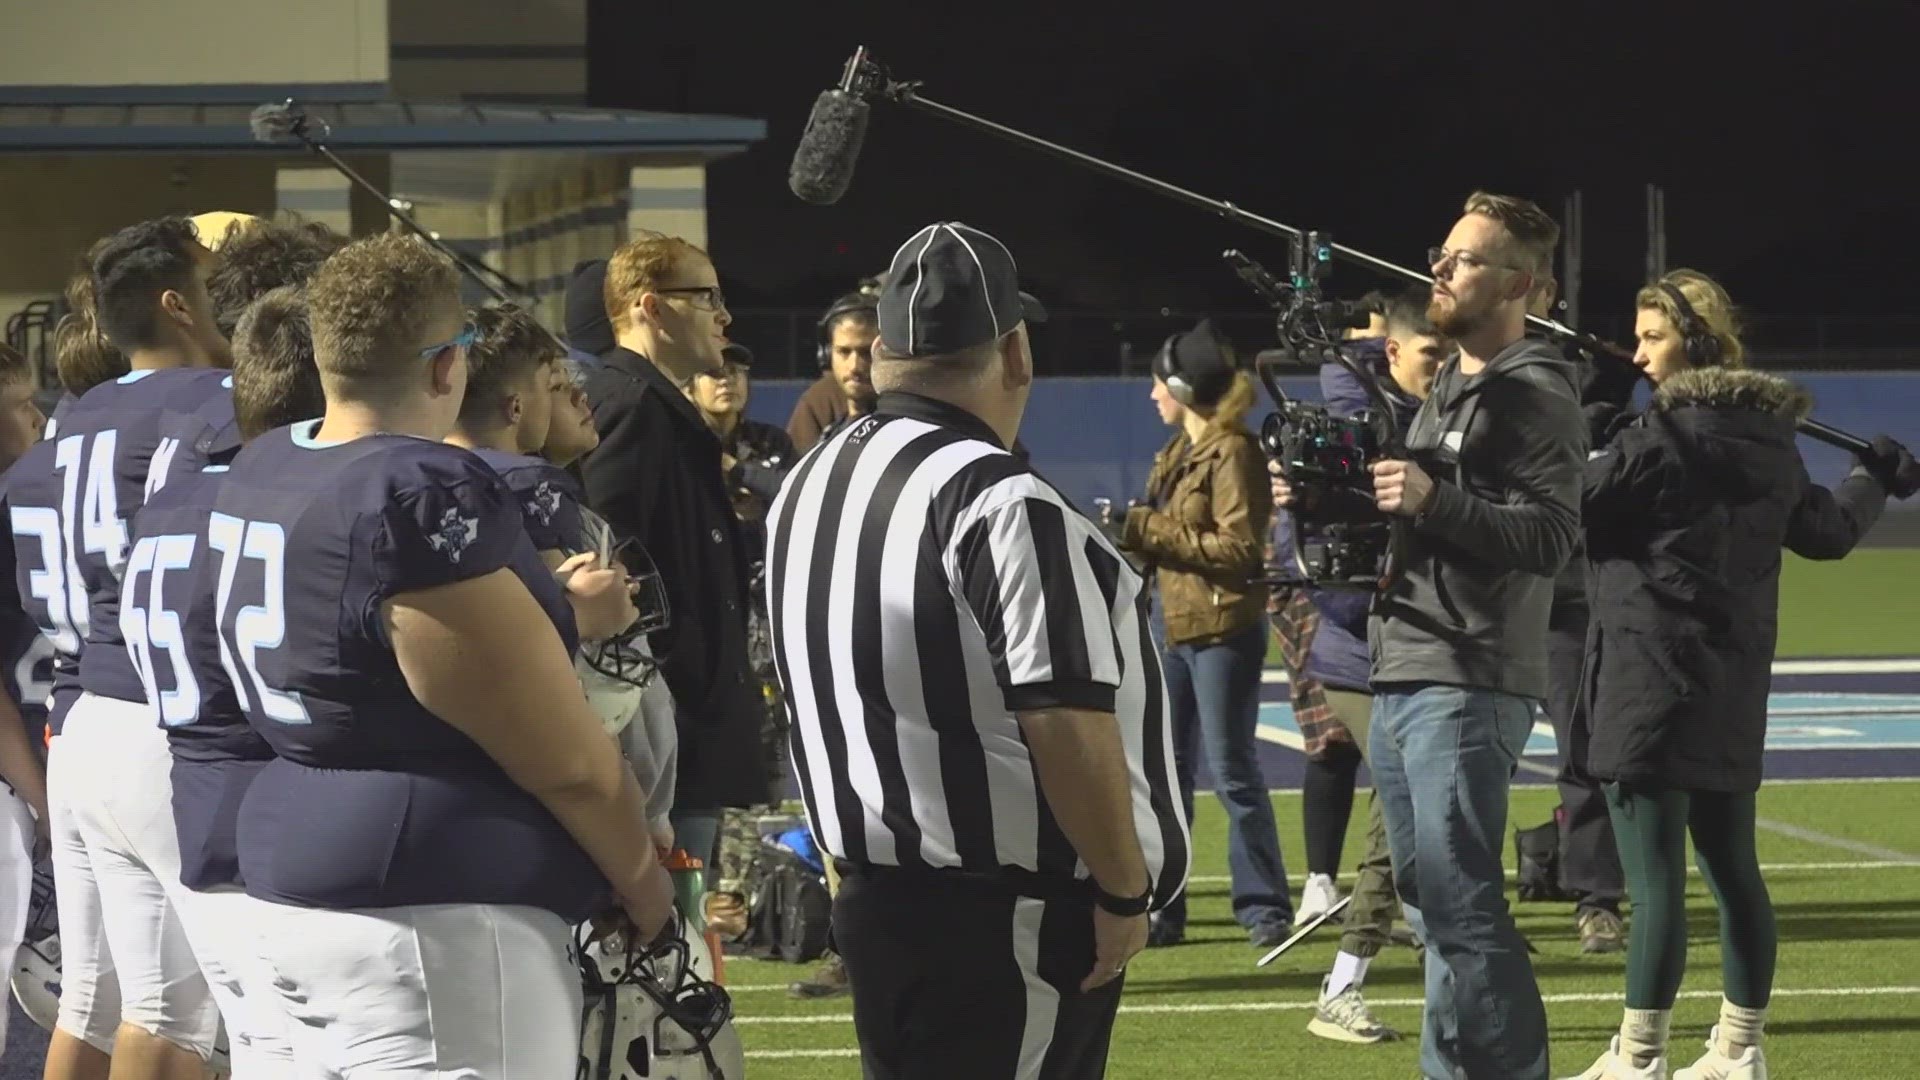 Emily Binns is a Ranger graduate. For a movie called "Stan The Man", she asked the Greenwood community to help film high school football scenes and they delivered.